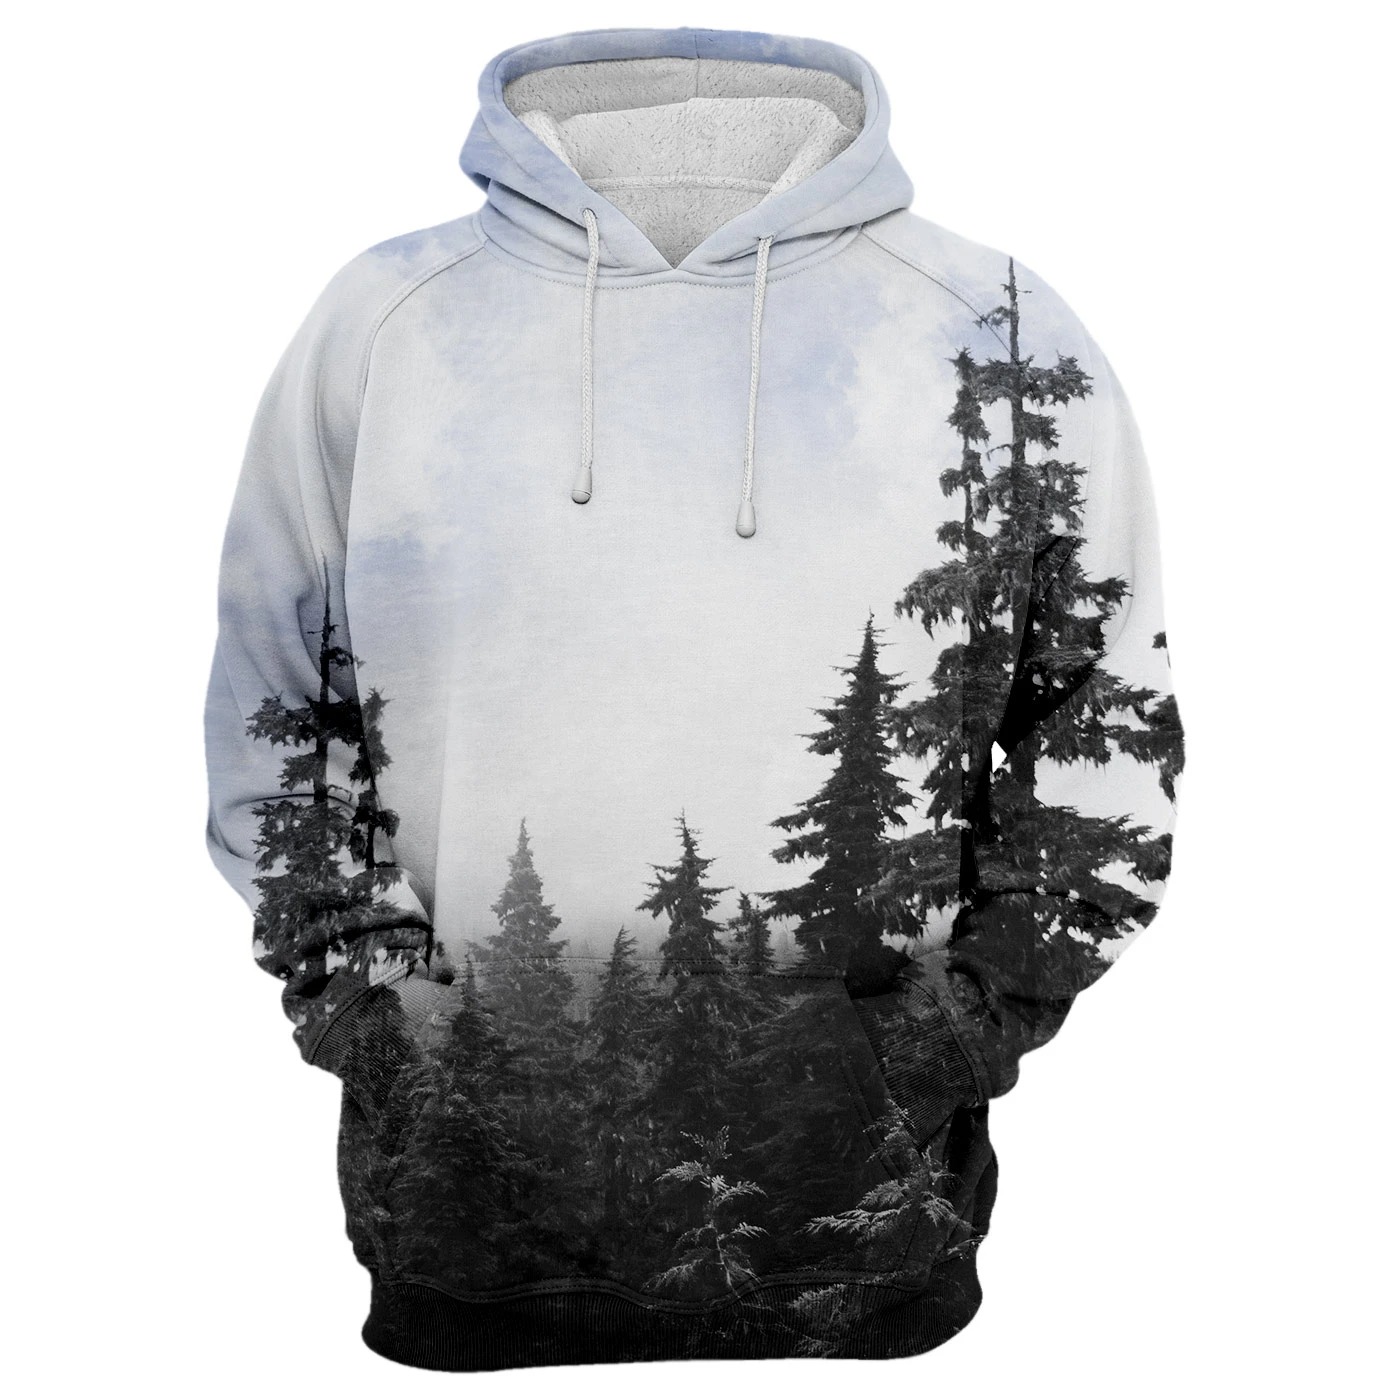 Chilly morning unisex 3d hoodie